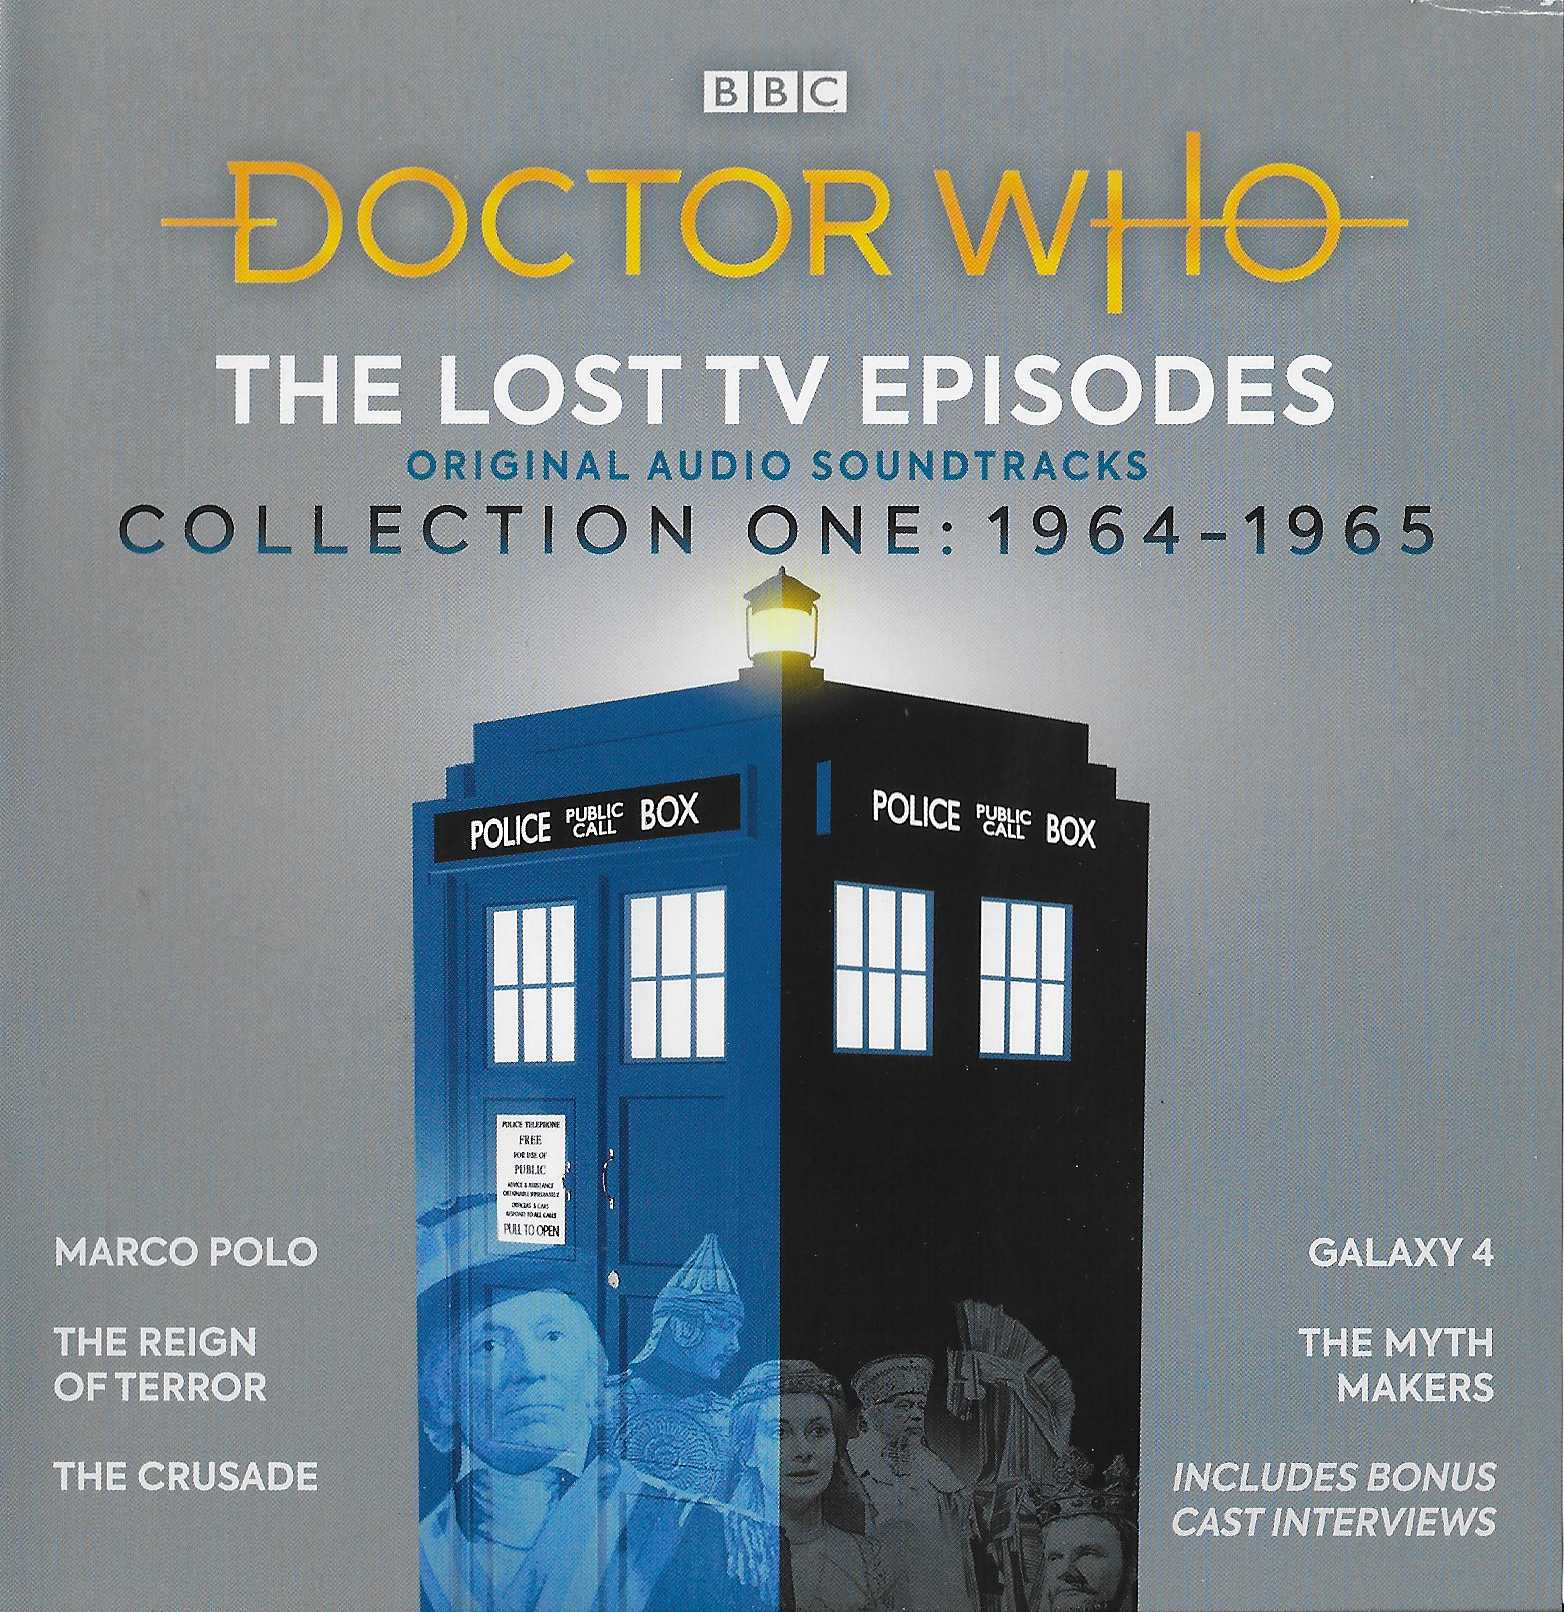 Picture of Doctor Who - The lost TV episodes - Collection one: 1964-1965 by artist Various from the BBC cds - Records and Tapes library